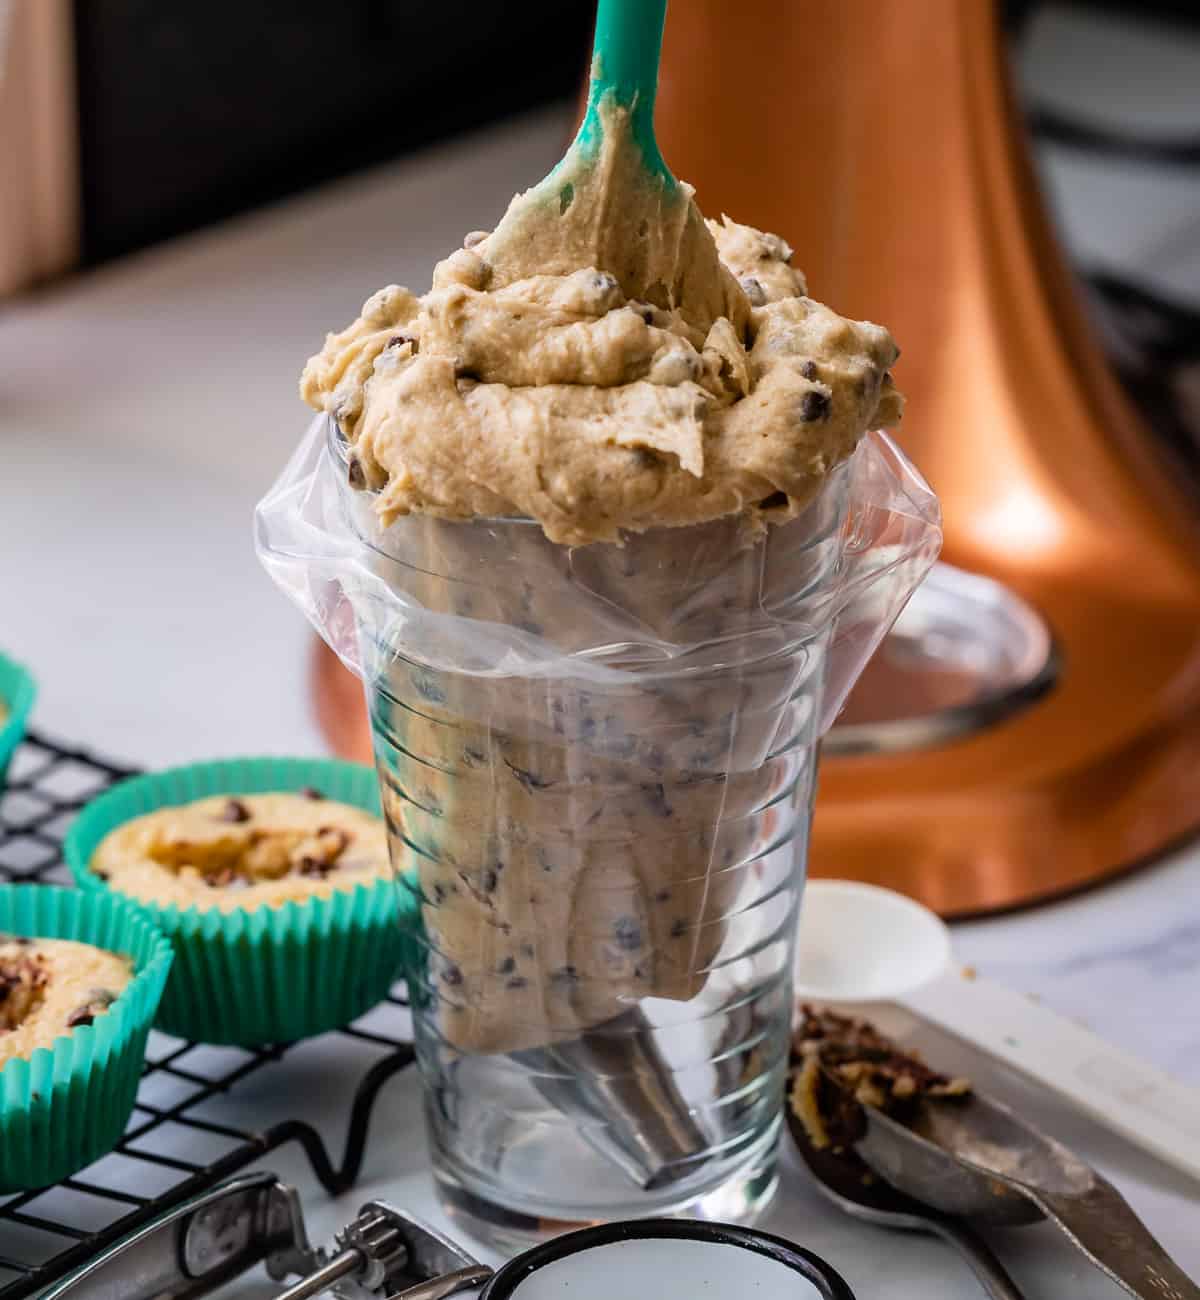 adding cookie dough frosting to an icing bag inside a glass.